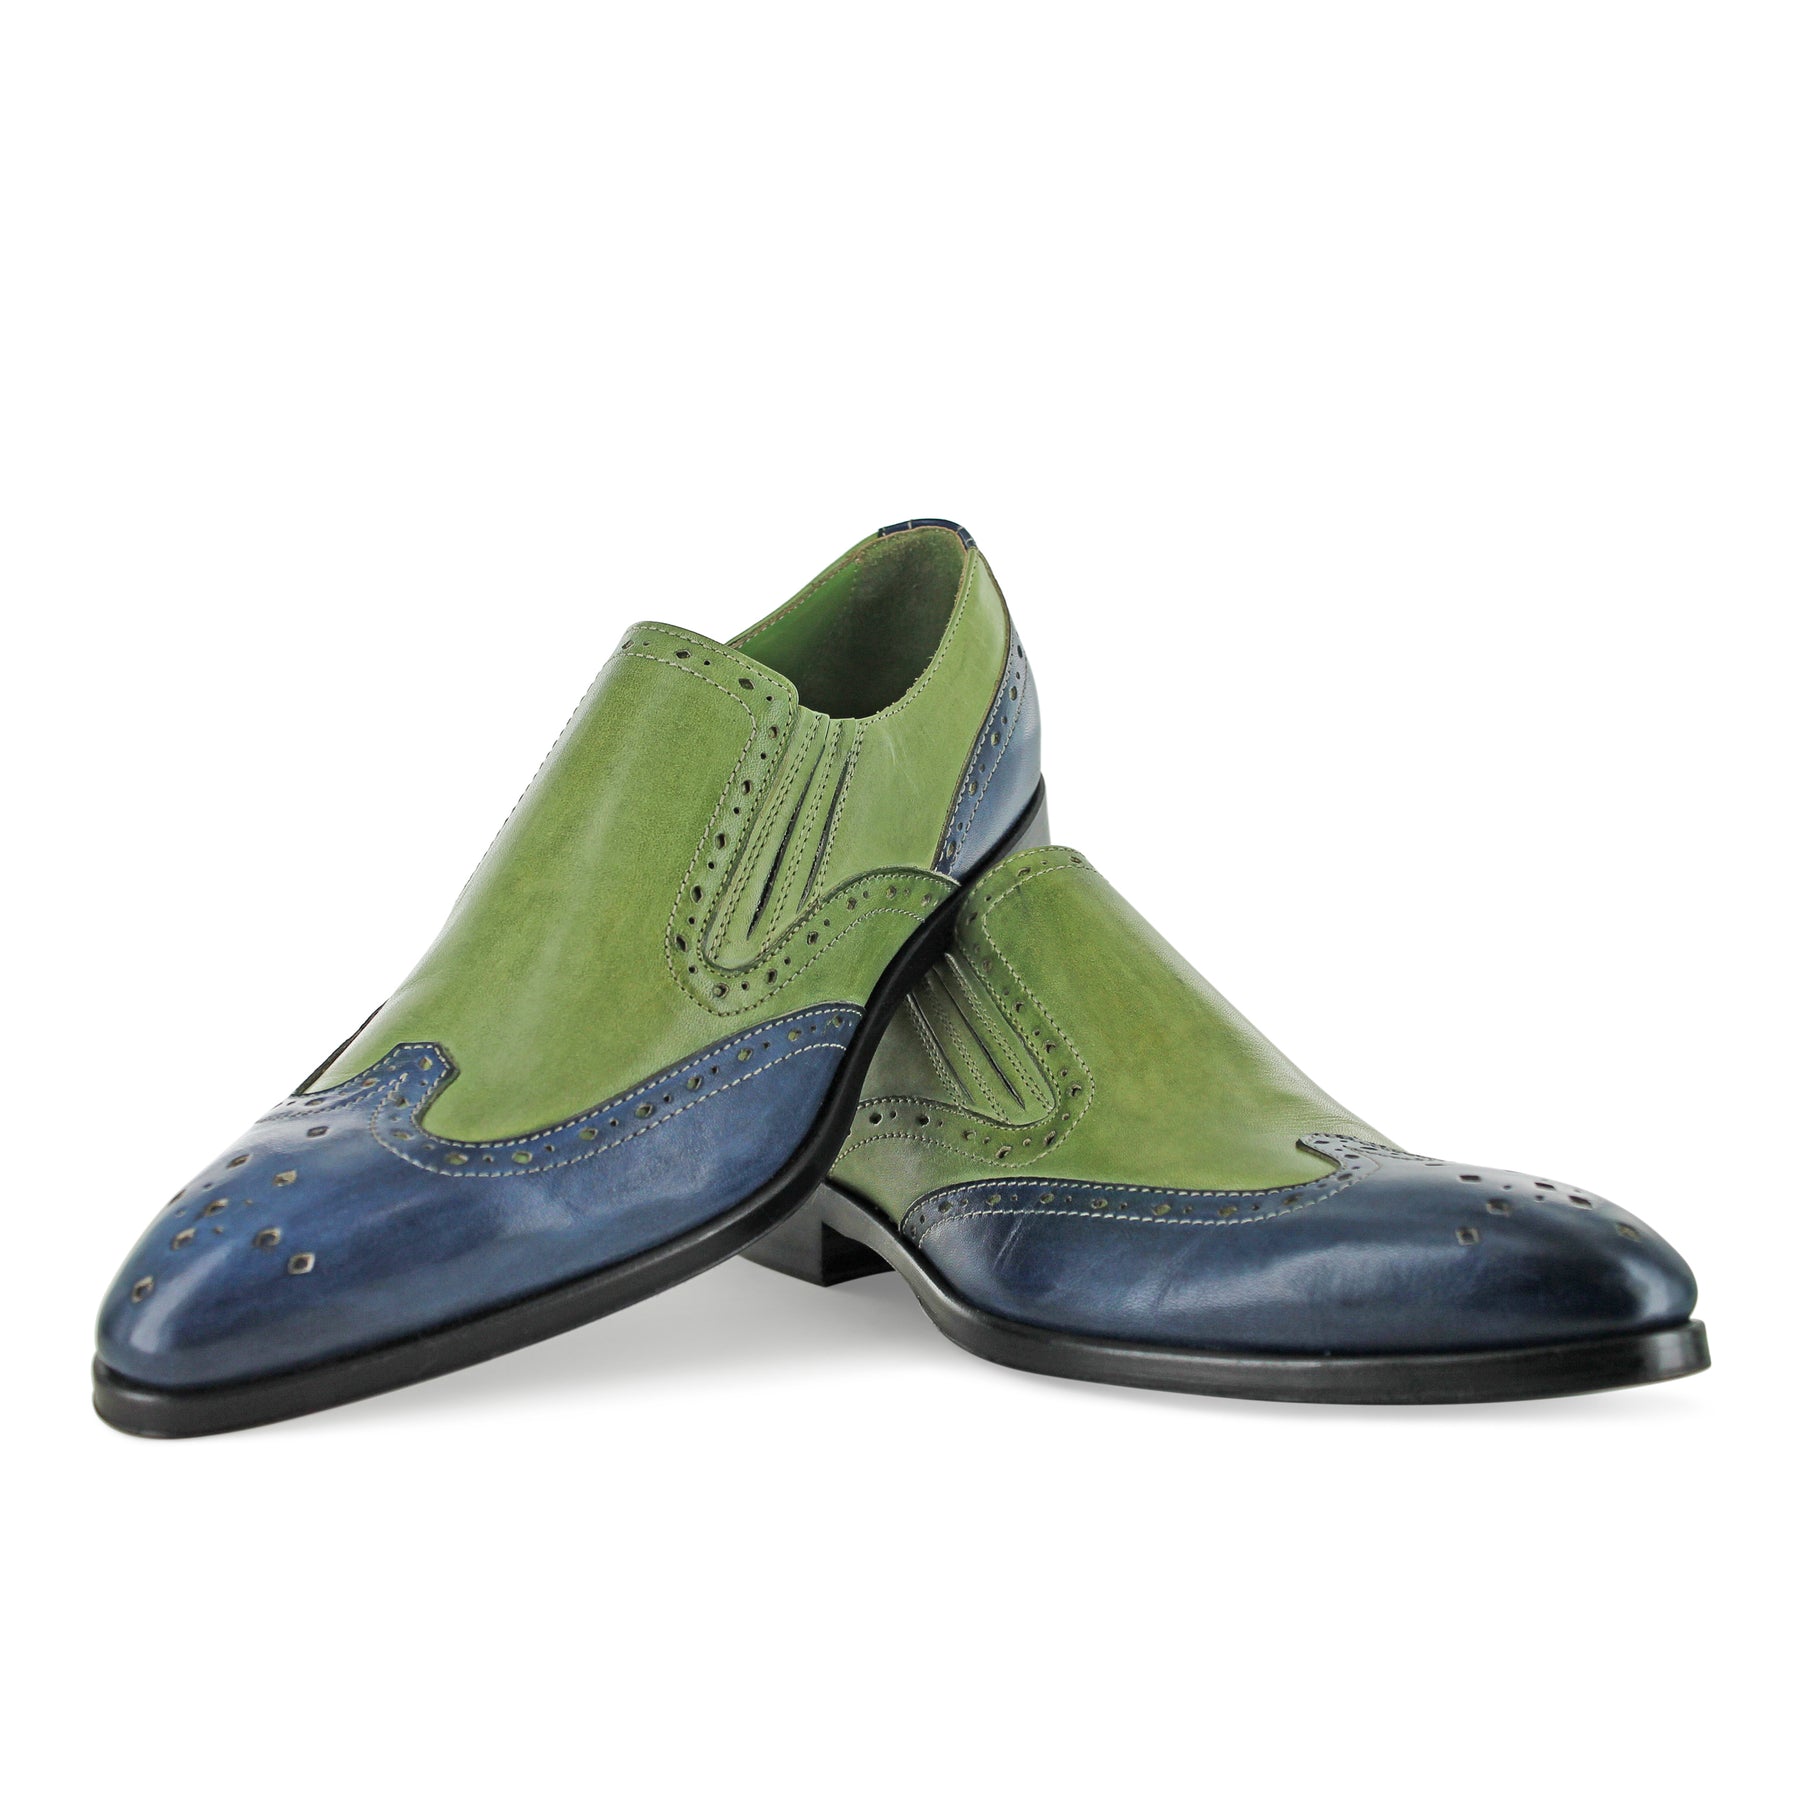 1350 - Green And Blue Slip On Brogue